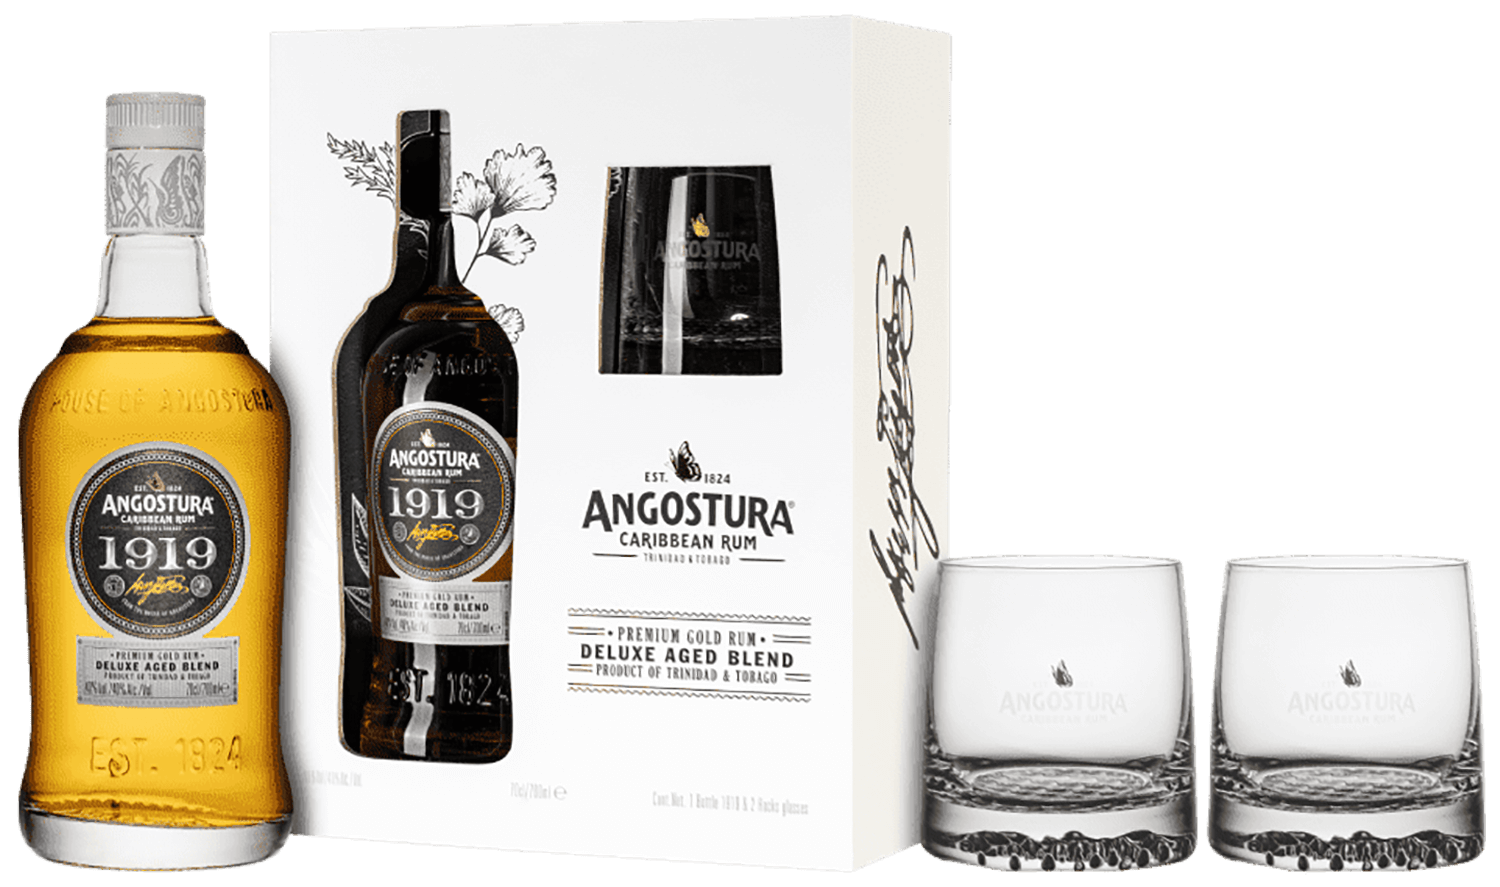 Angostura 1919 (gift box with 2 glasses) onegin gift box with 4 glasses